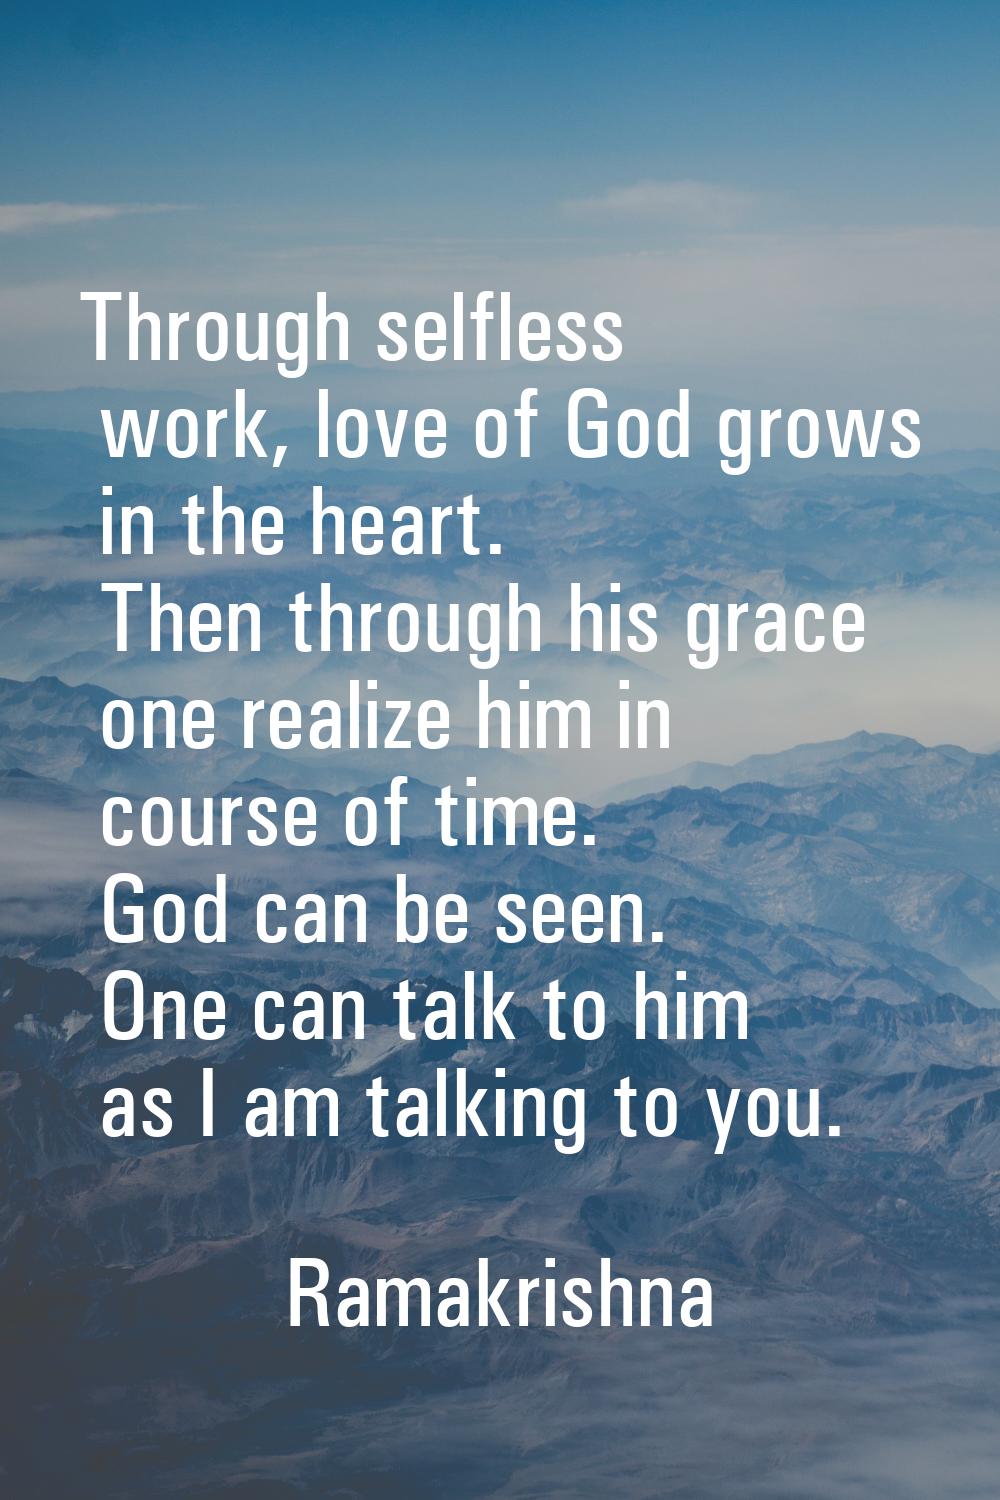 Through selfless work, love of God grows in the heart. Then through his grace one realize him in co